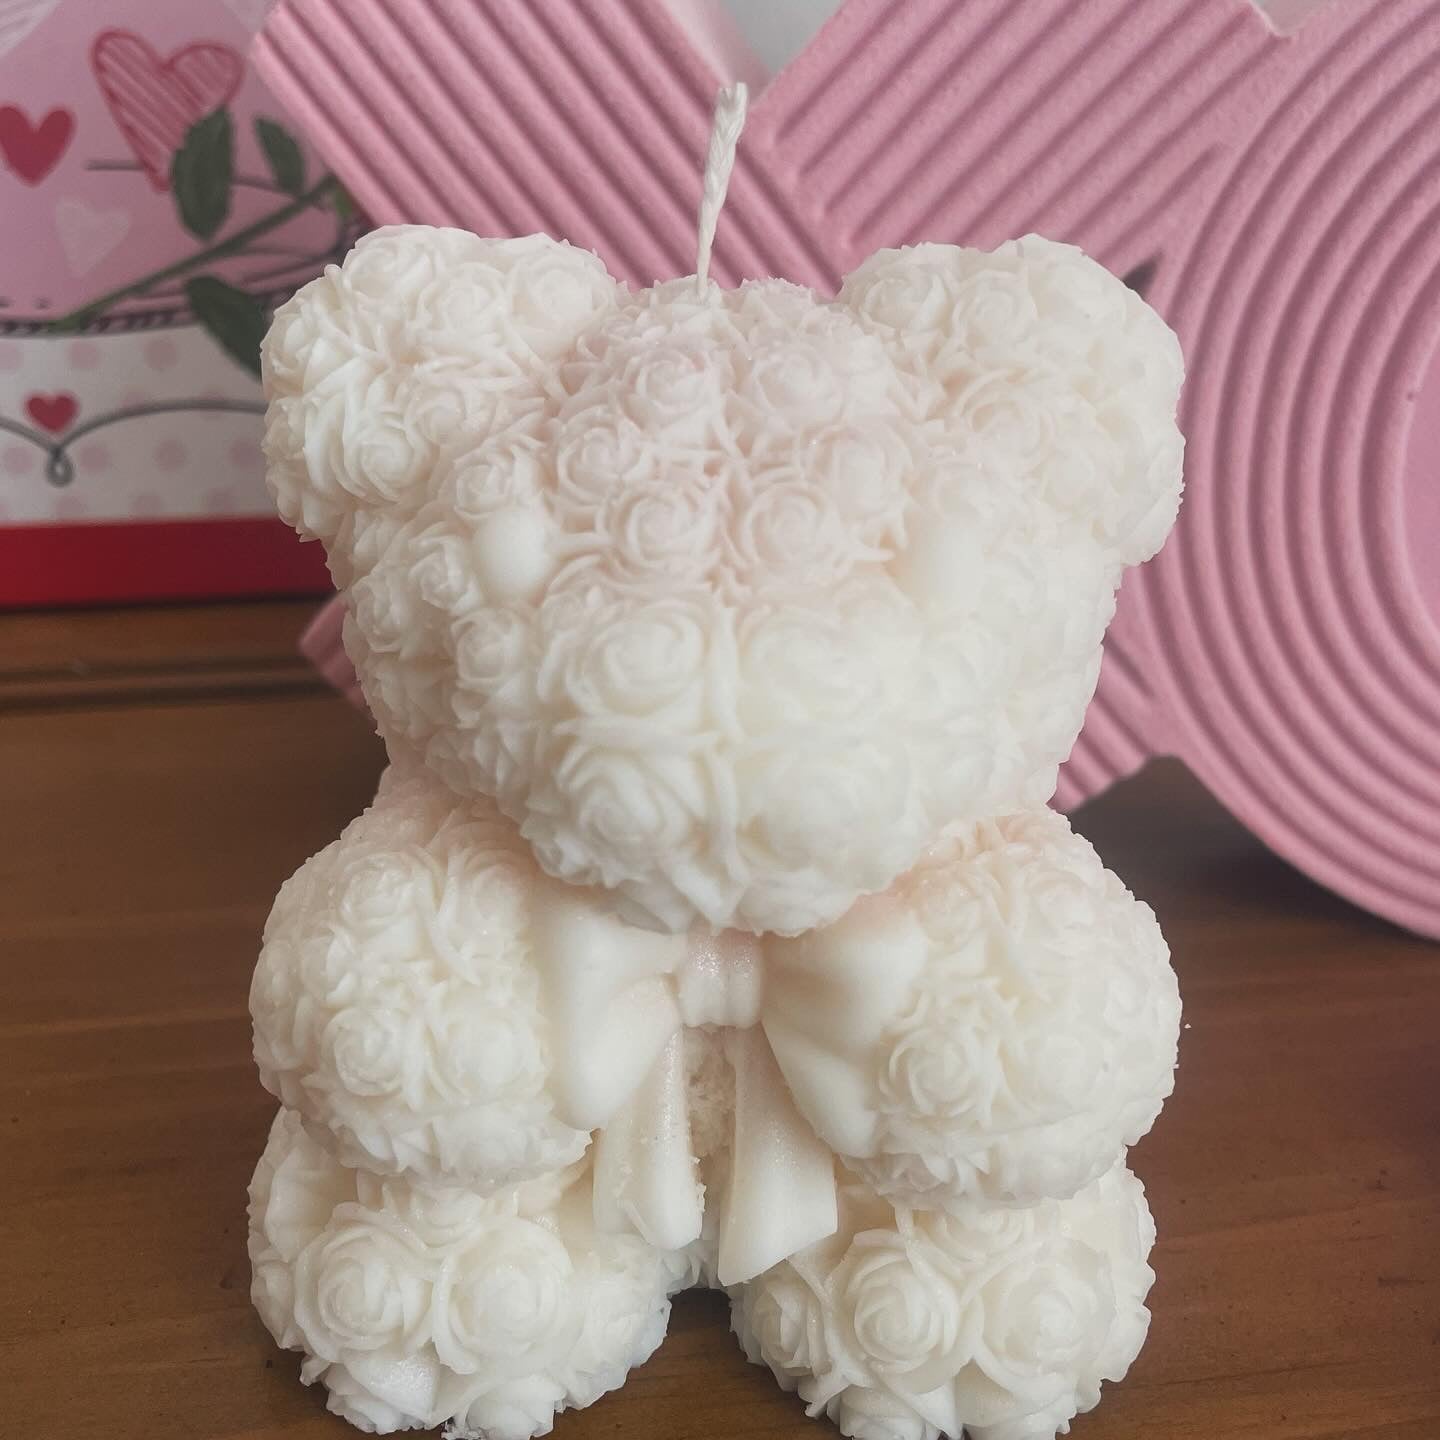 Valentines Teddy Bear Candle